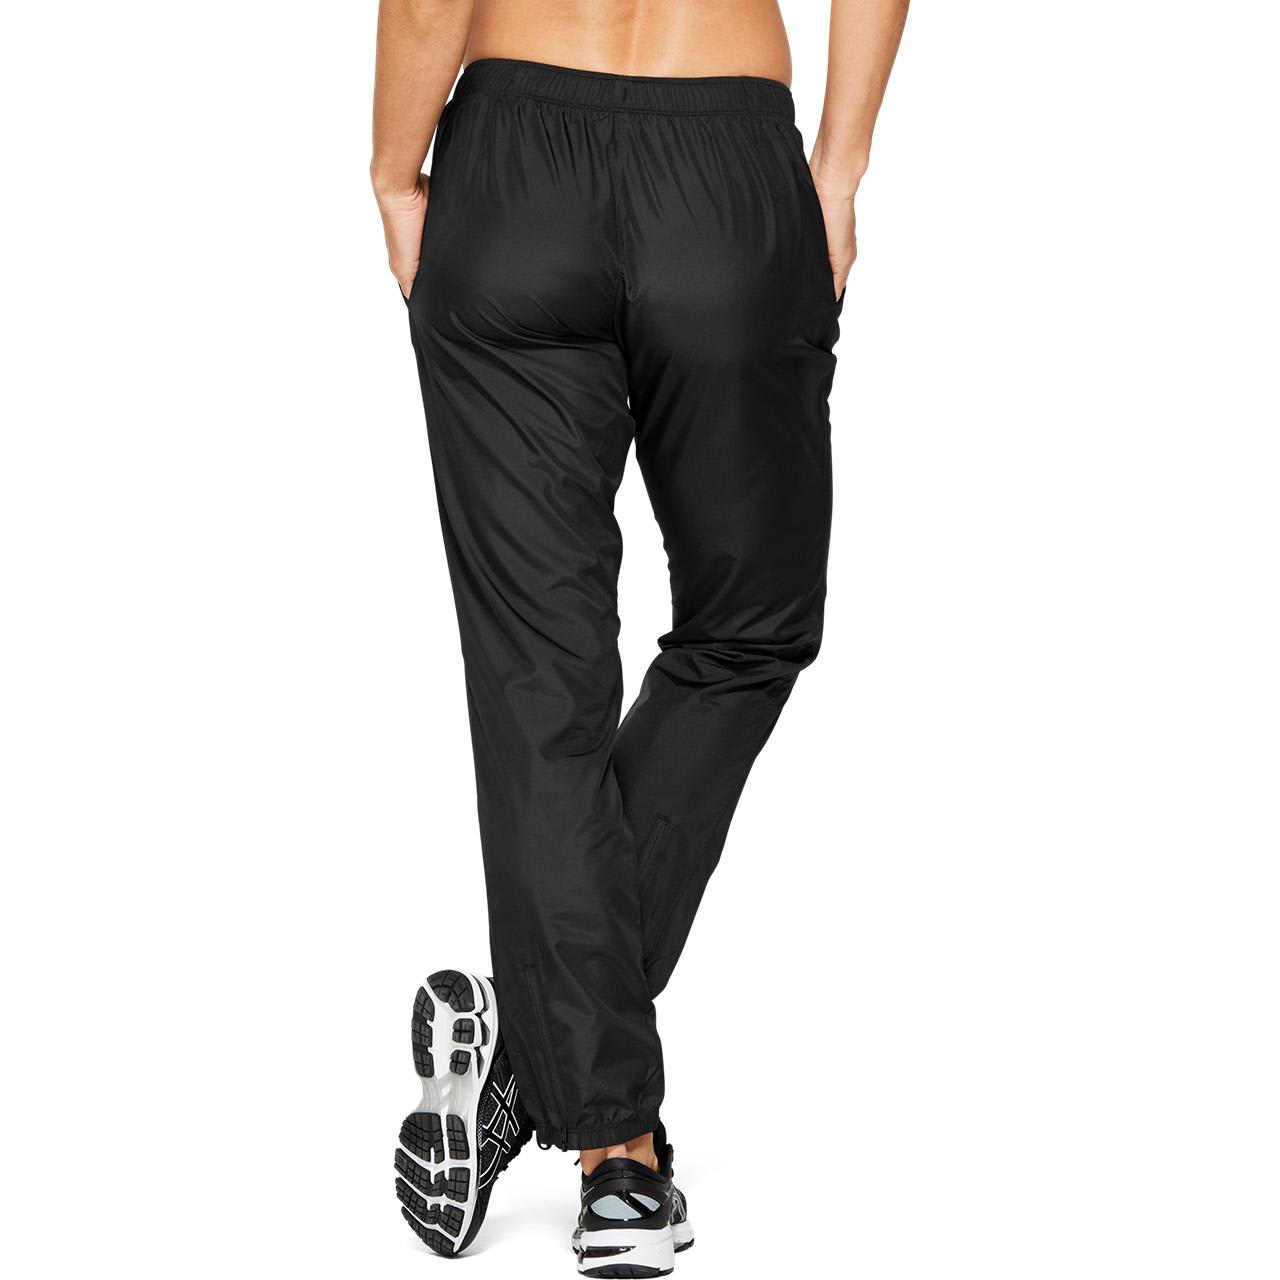 Buy Asics Women's Silver Woven Pant from